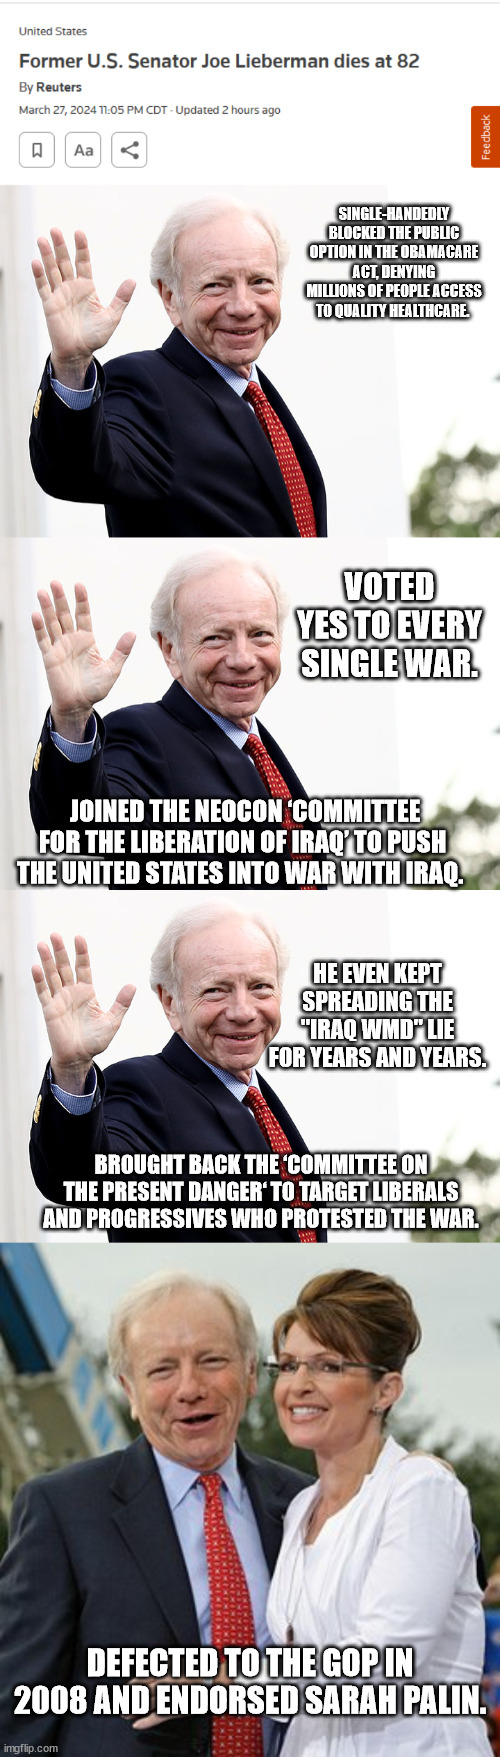 Oh, LIeberman died? Well, let's remind everyone who he really was. | SINGLE-HANDEDLY BLOCKED THE PUBLIC OPTION IN THE OBAMACARE ACT, DENYING MILLIONS OF PEOPLE ACCESS TO QUALITY HEALTHCARE. VOTED YES TO EVERY SINGLE WAR. JOINED THE NEOCON ‘COMMITTEE FOR THE LIBERATION OF IRAQ’ TO PUSH THE UNITED STATES INTO WAR WITH IRAQ. HE EVEN KEPT SPREADING THE "IRAQ WMD" LIE FOR YEARS AND YEARS. BROUGHT BACK THE ‘COMMITTEE ON THE PRESENT DANGER‘ TO TARGET LIBERALS AND PROGRESSIVES WHO PROTESTED THE WAR. DEFECTED TO THE GOP IN 2008 AND ENDORSED SARAH PALIN. | image tagged in joe lieberman | made w/ Imgflip meme maker